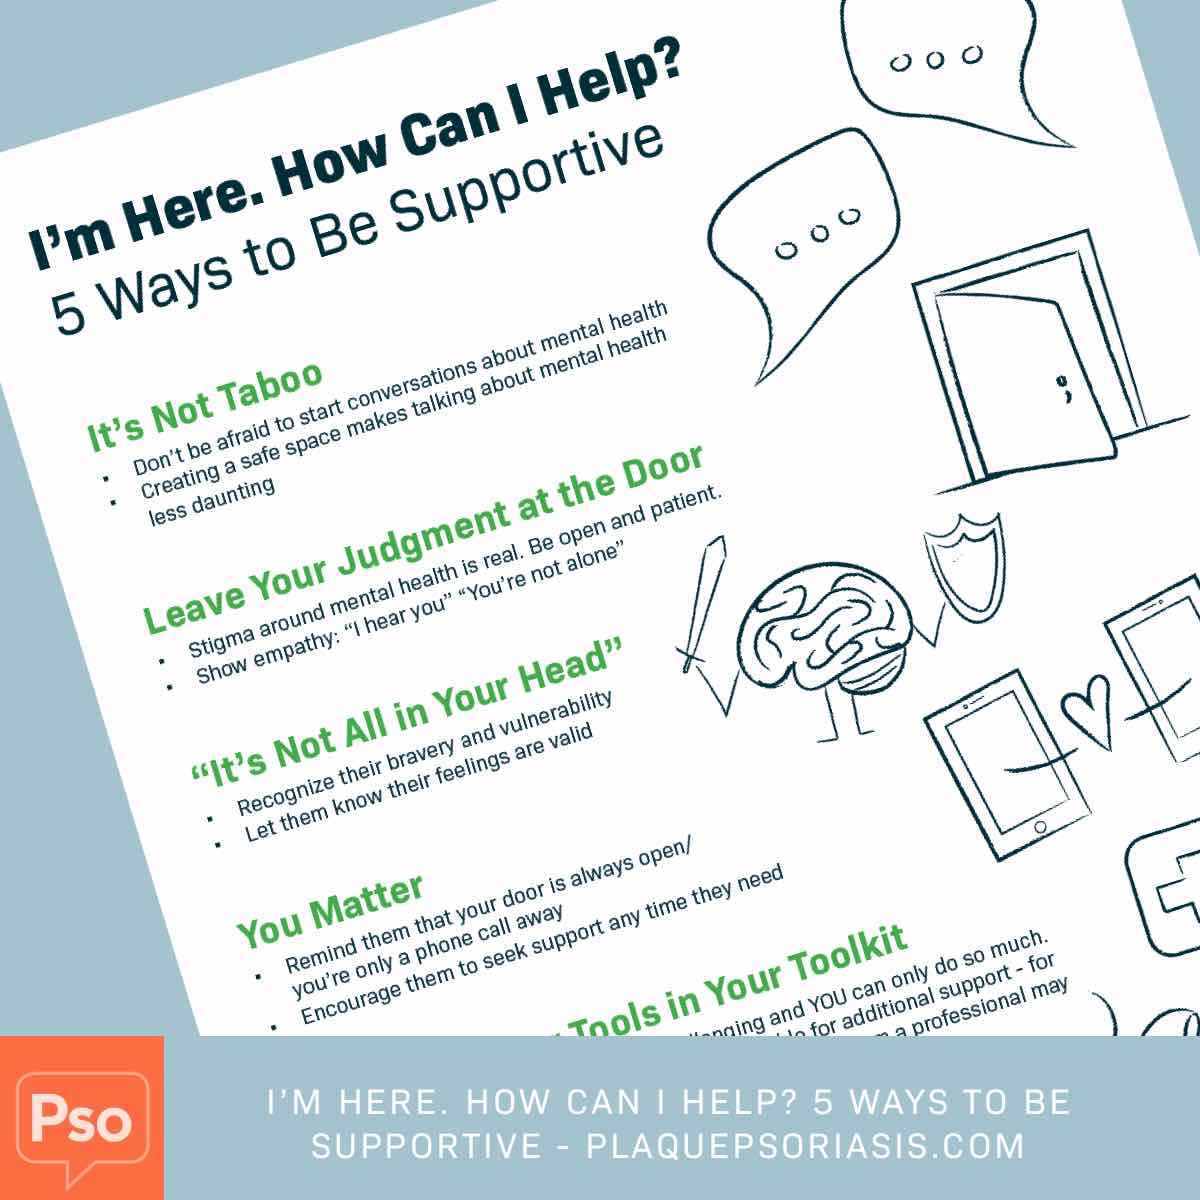 Five ways to be supportive